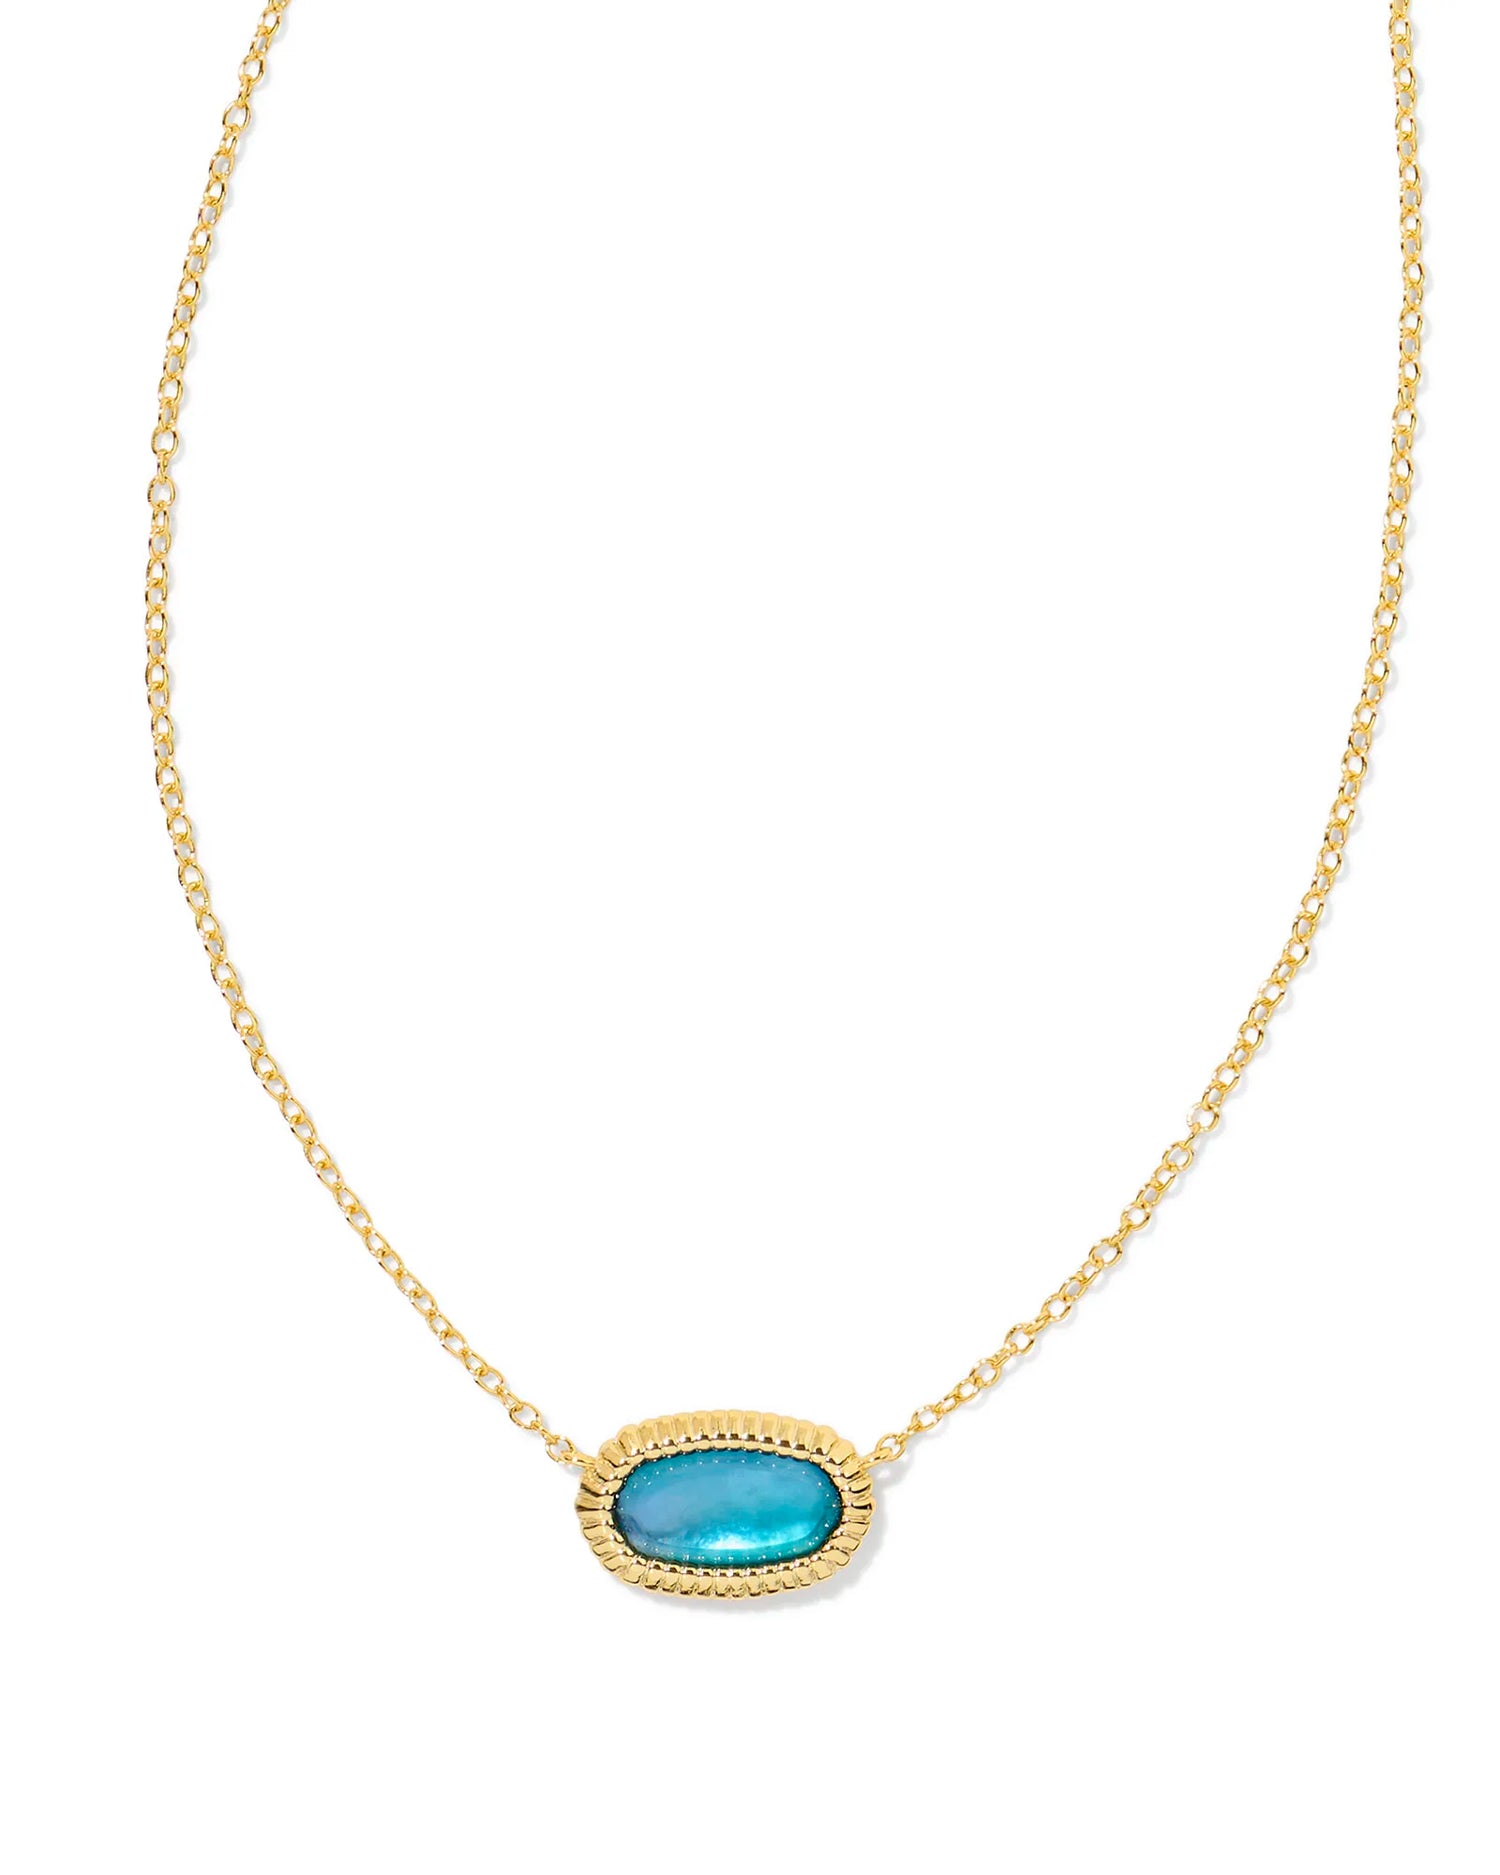 gold necklace with a framed pendant with a blue watercolor stone